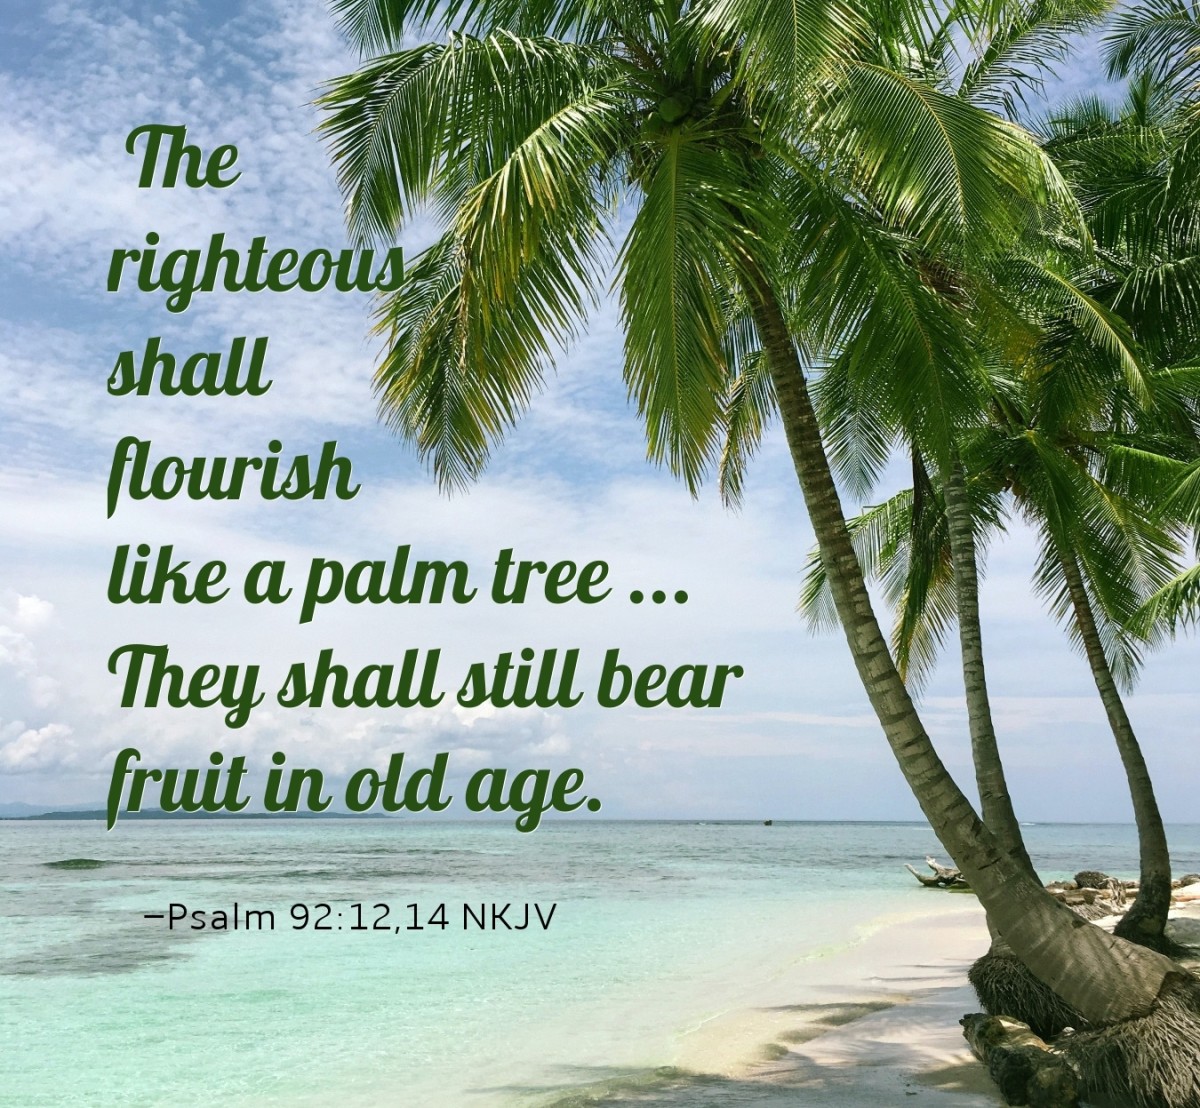 Good people are like budding palm trees. (Psalm 92:12 Easy-to-Read Version)